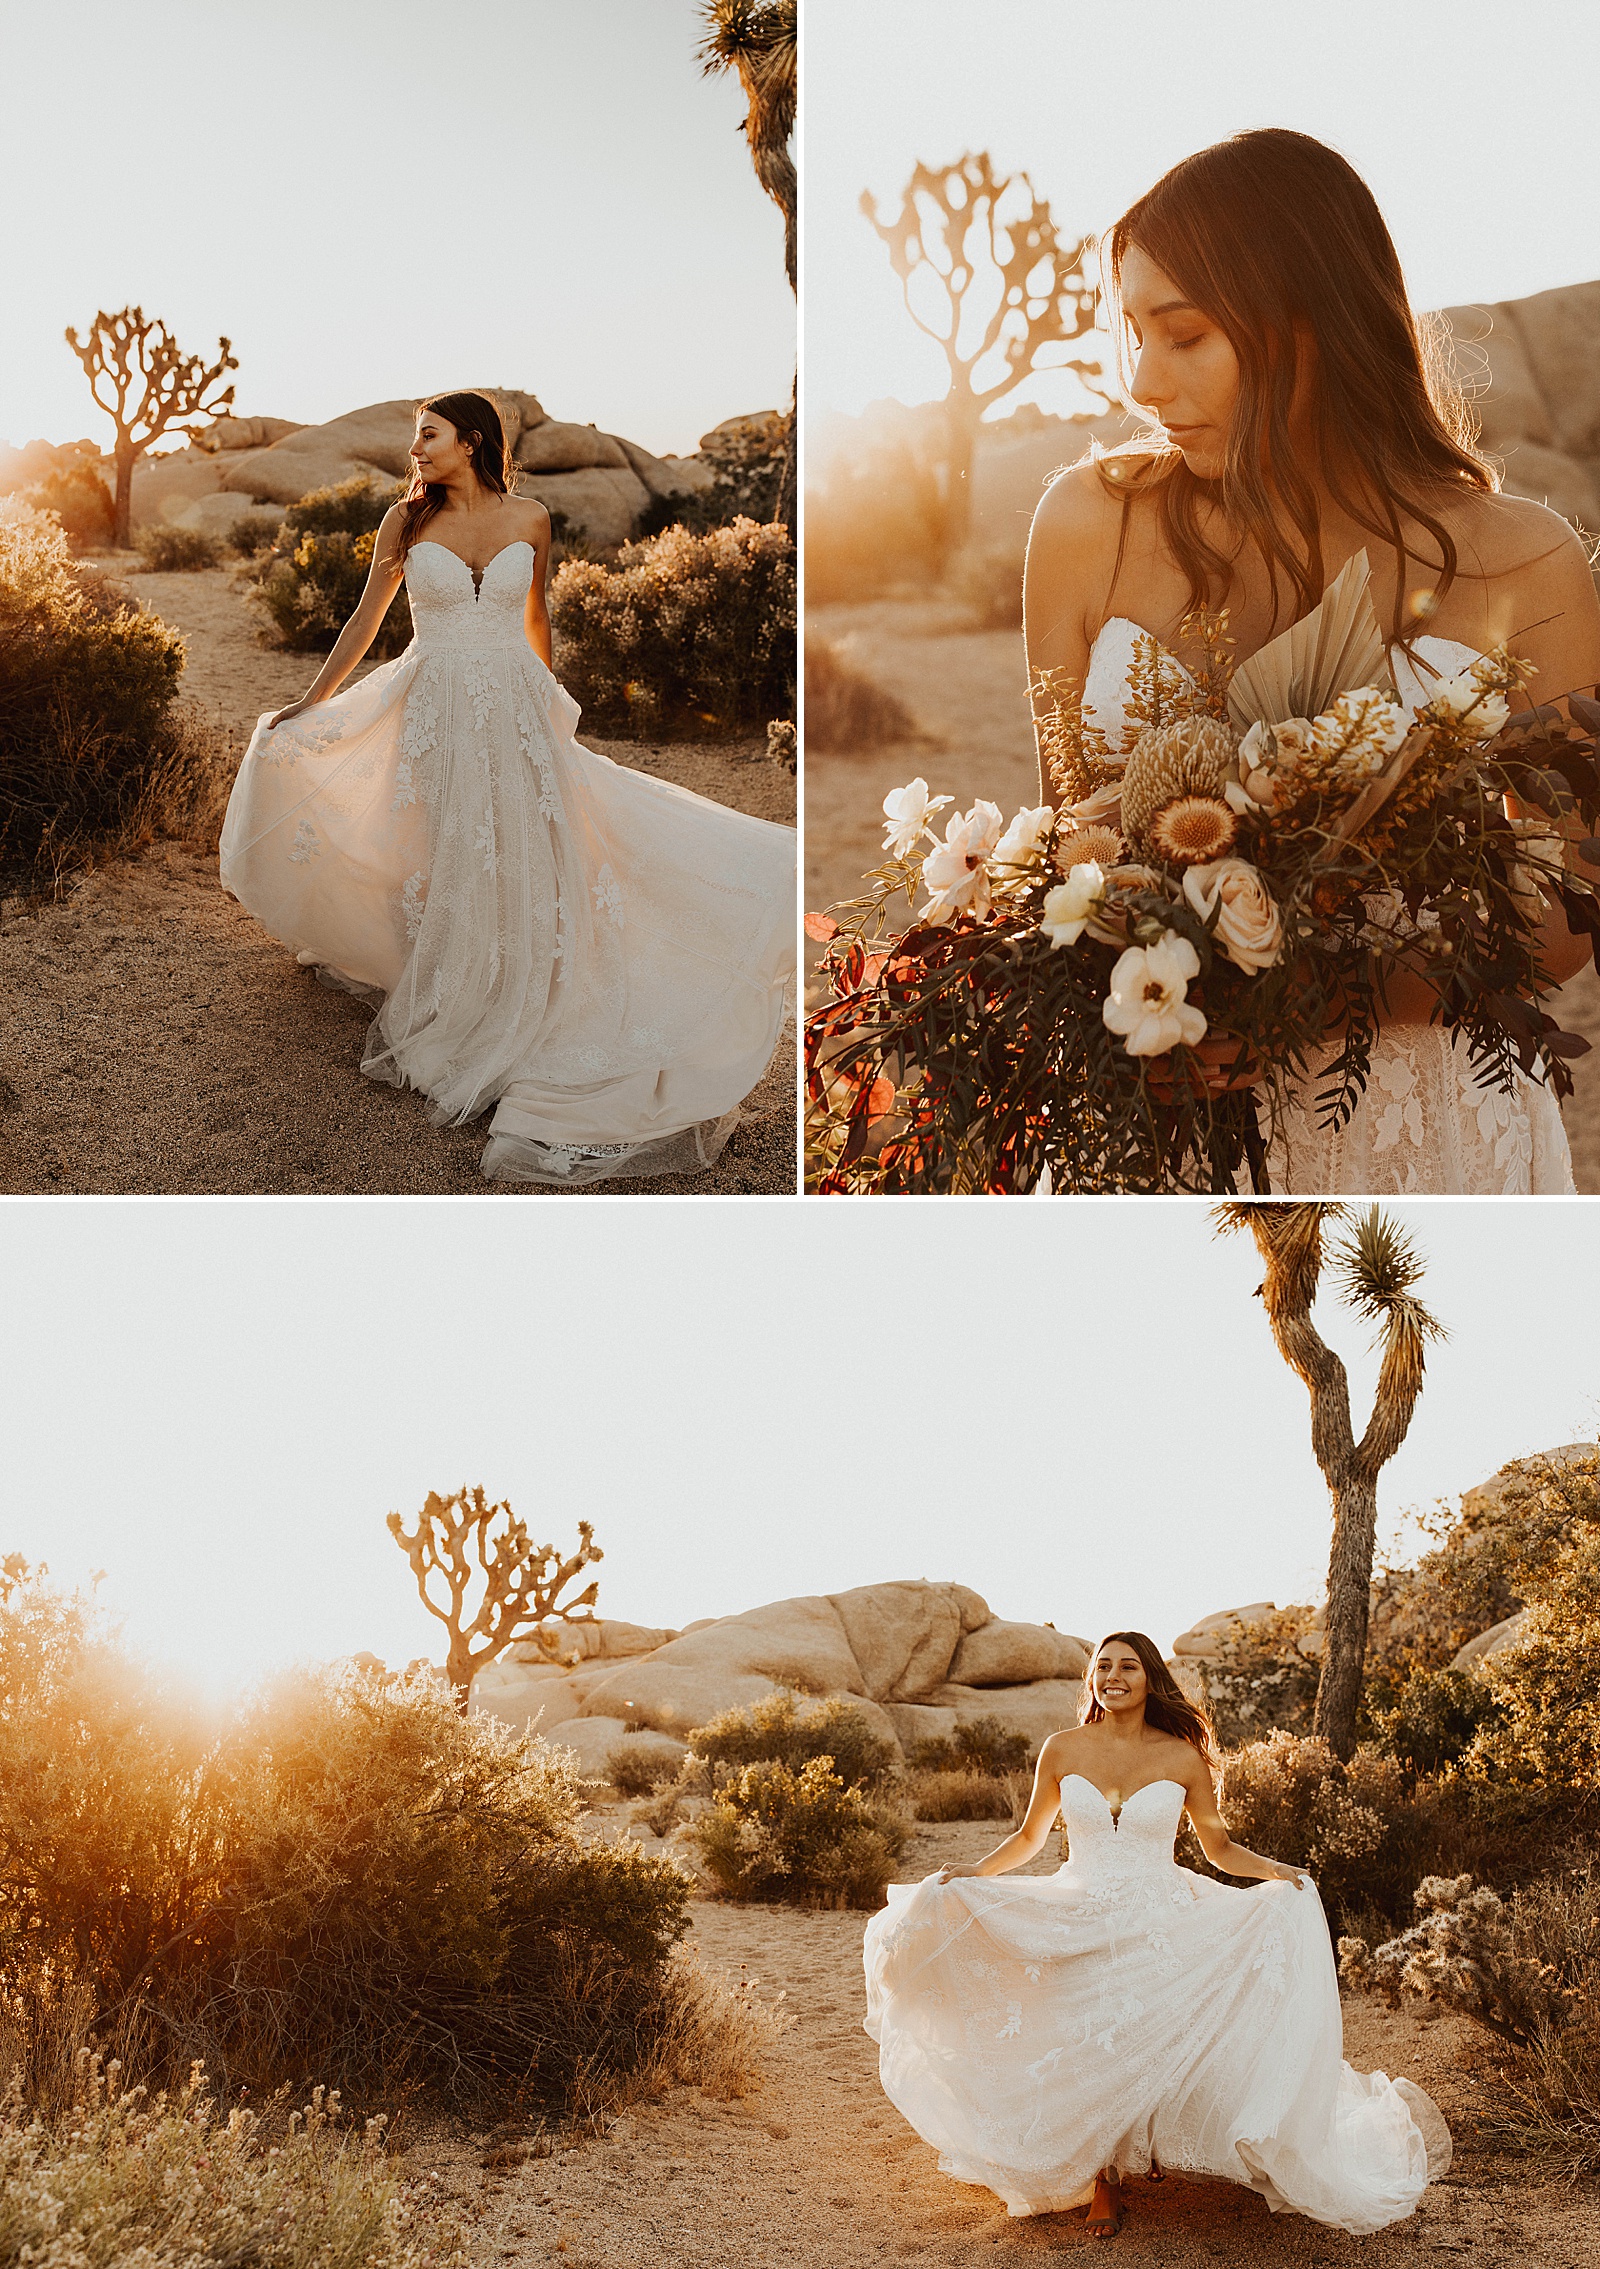 A bridal photo at a gorgeous elopement in Joshua Tree National Park.